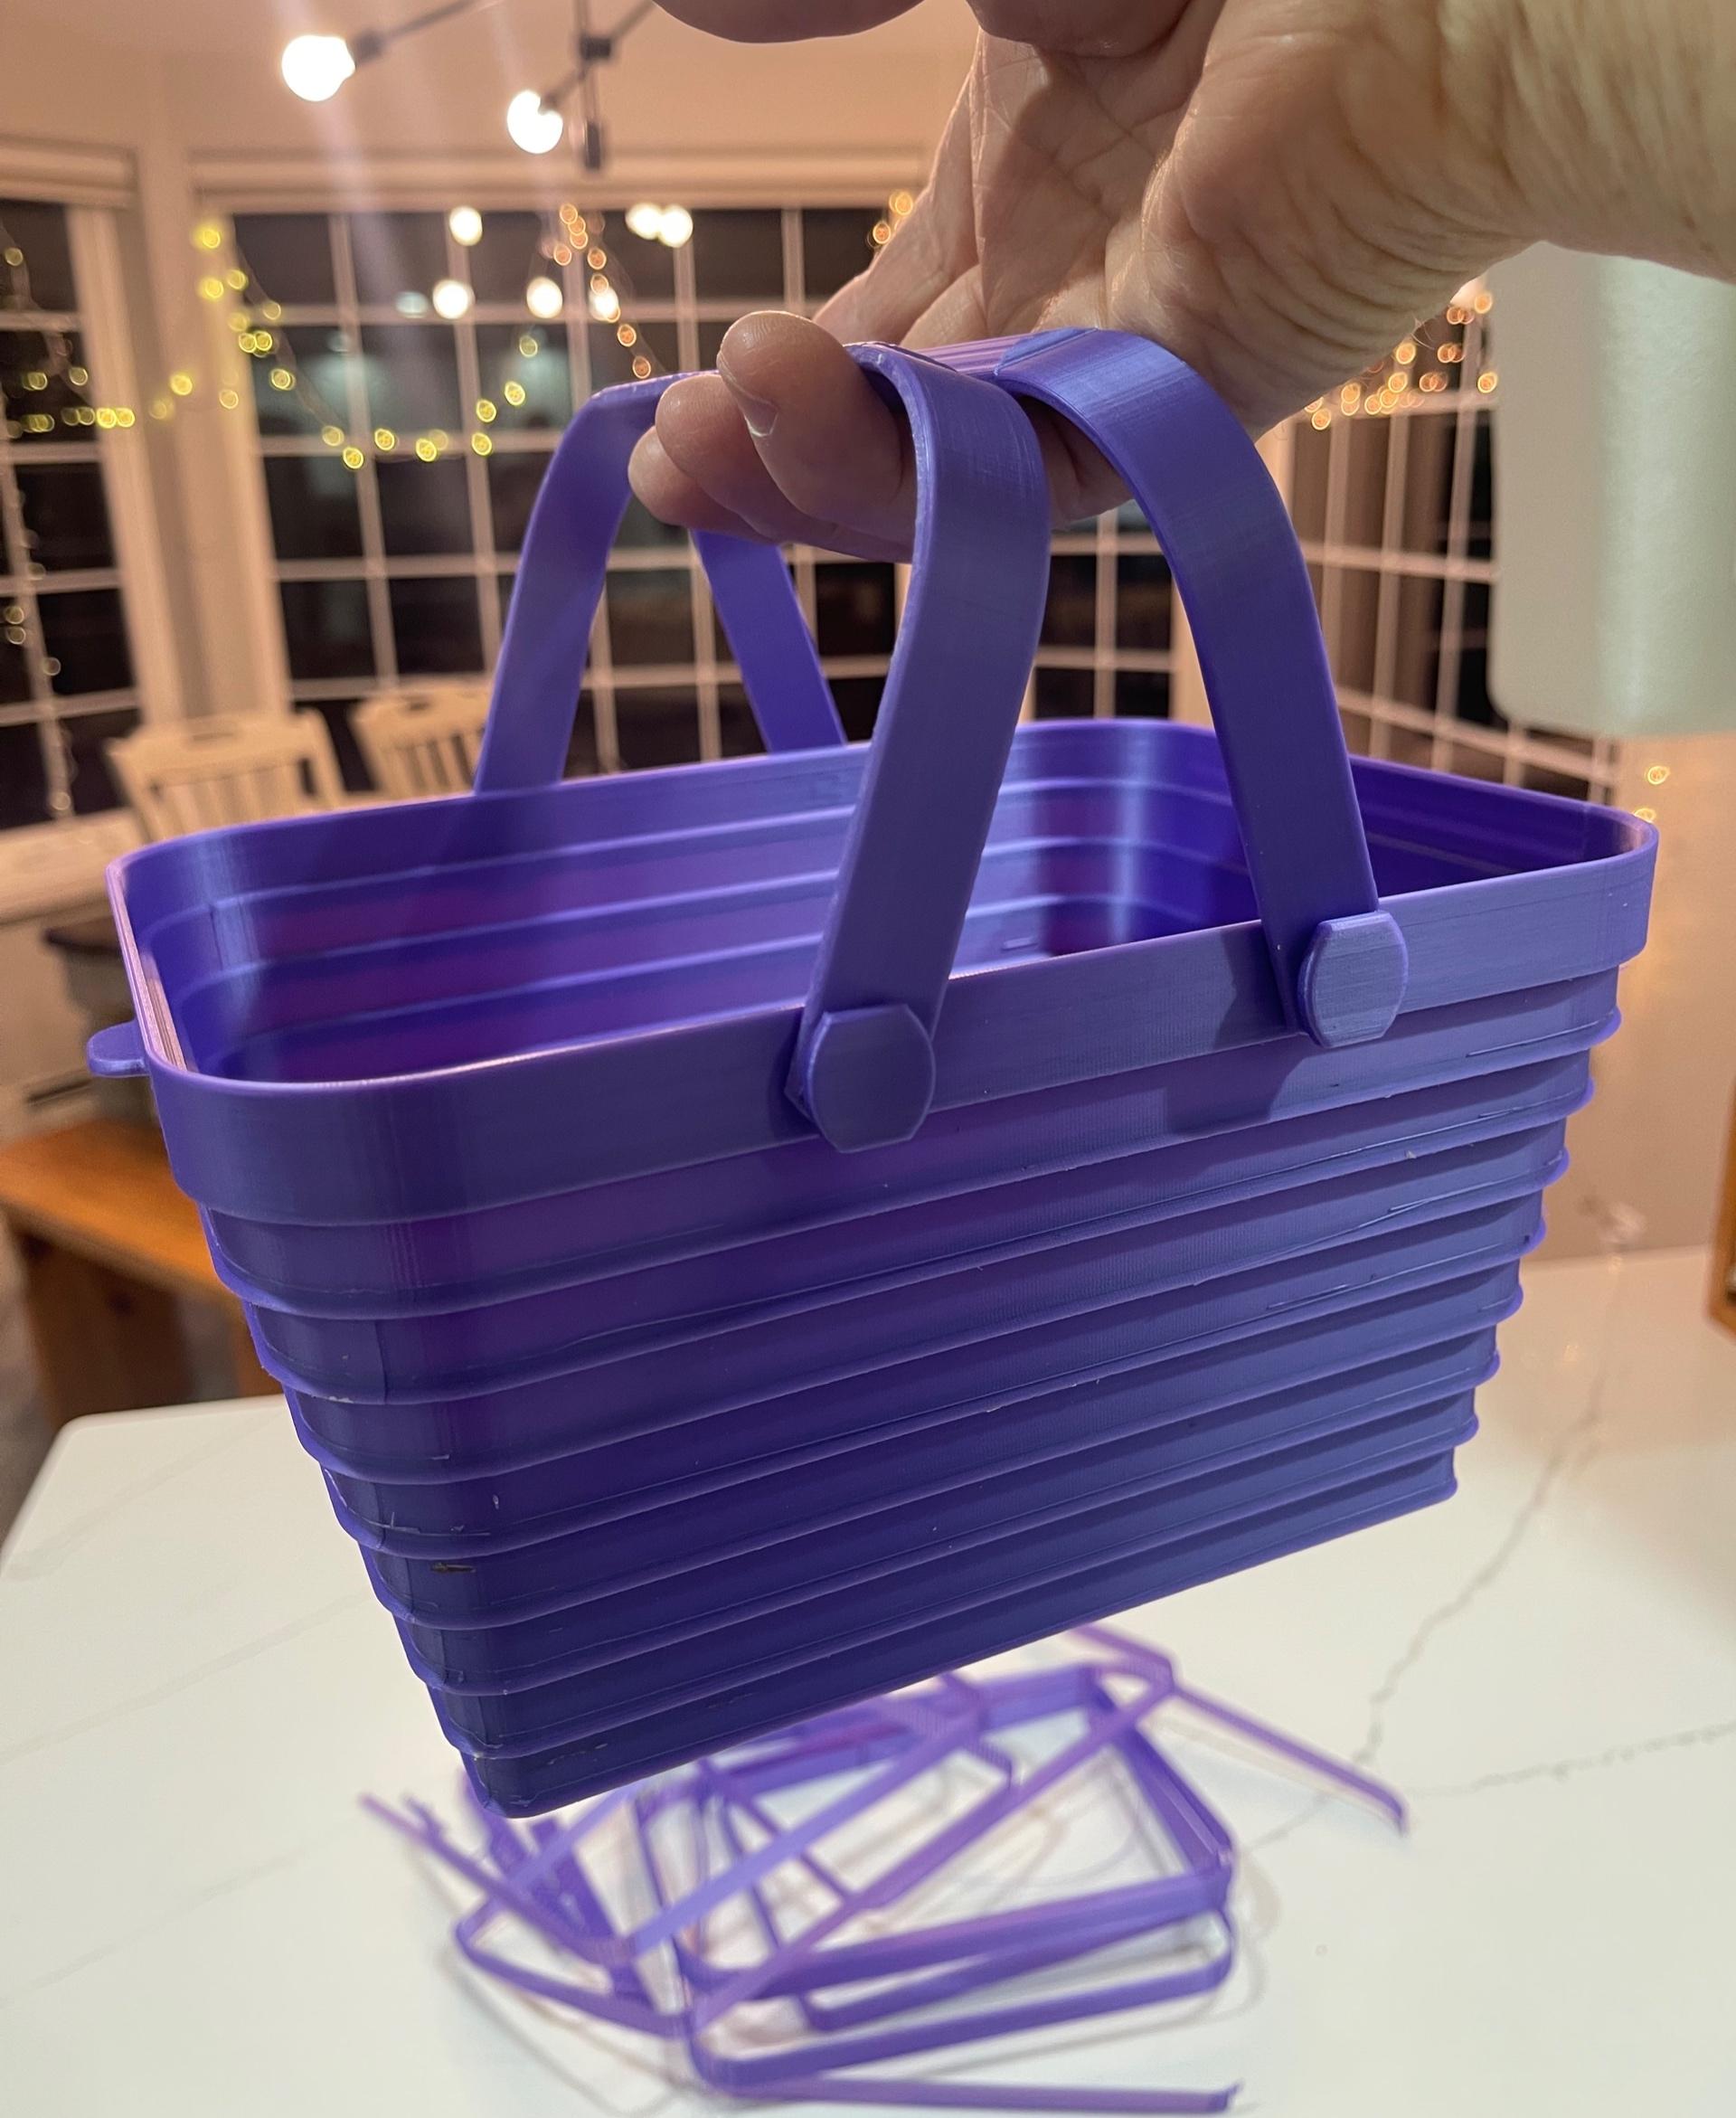 Collapsible Picnic Basket.stl - Finished product! - 3d model